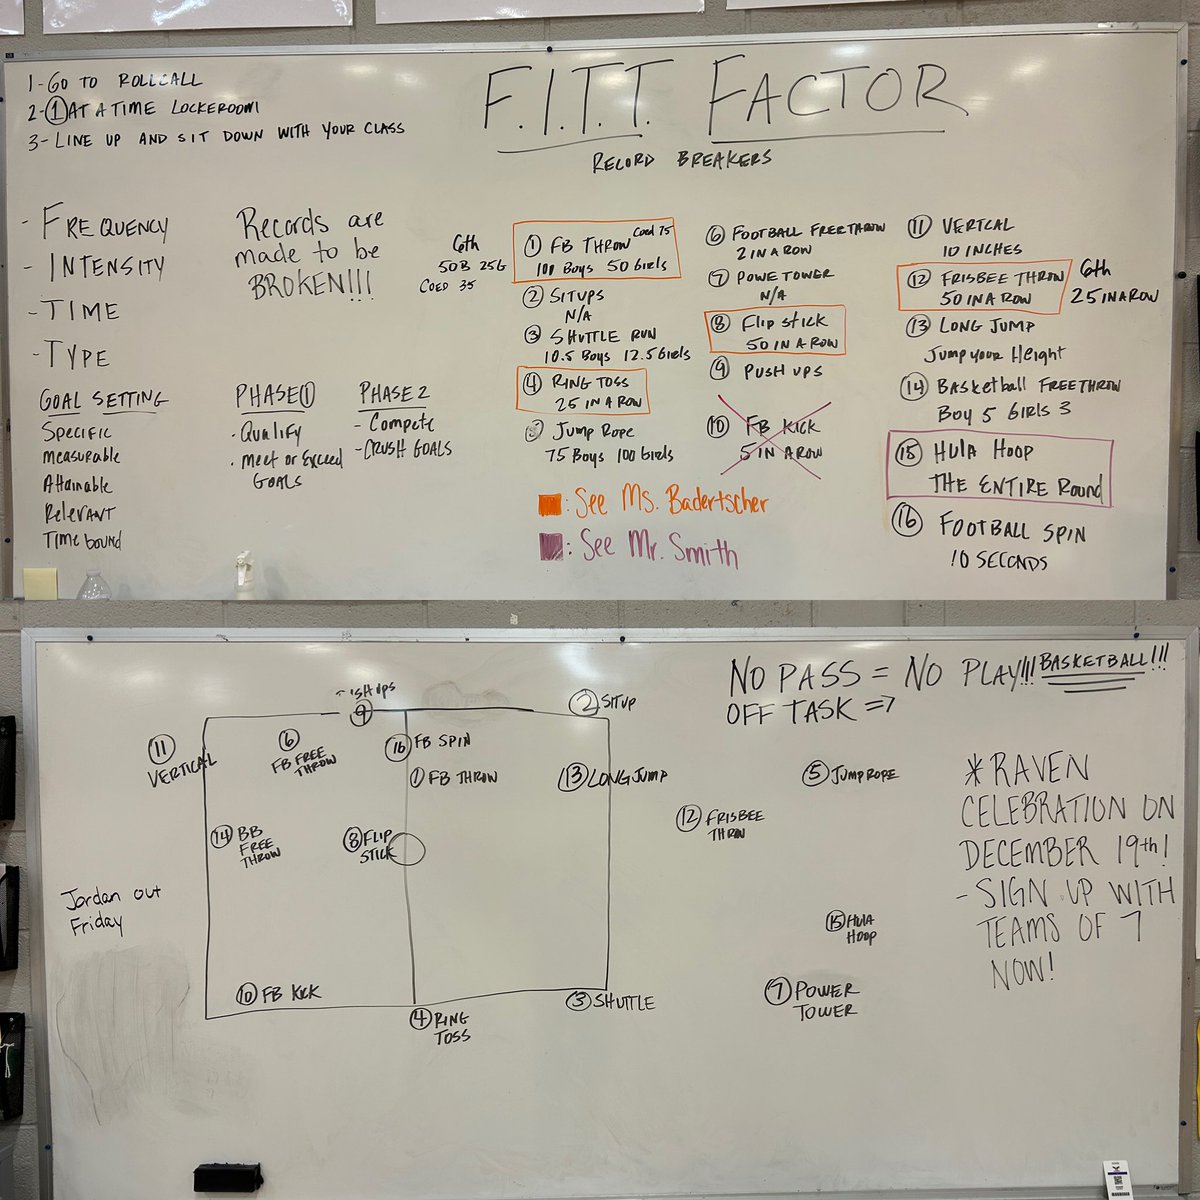 FITT FACTOR is a student and teacher favorite! Had a couple of students hula hoop for 16th this year. #worksinMSPEtoo
#physed #iteachpe #makethebestofeveryday
#allkidslovetoplay 
#pe #getactive #letsmove #physicaleducation #gym #school #weareallkids #playmore